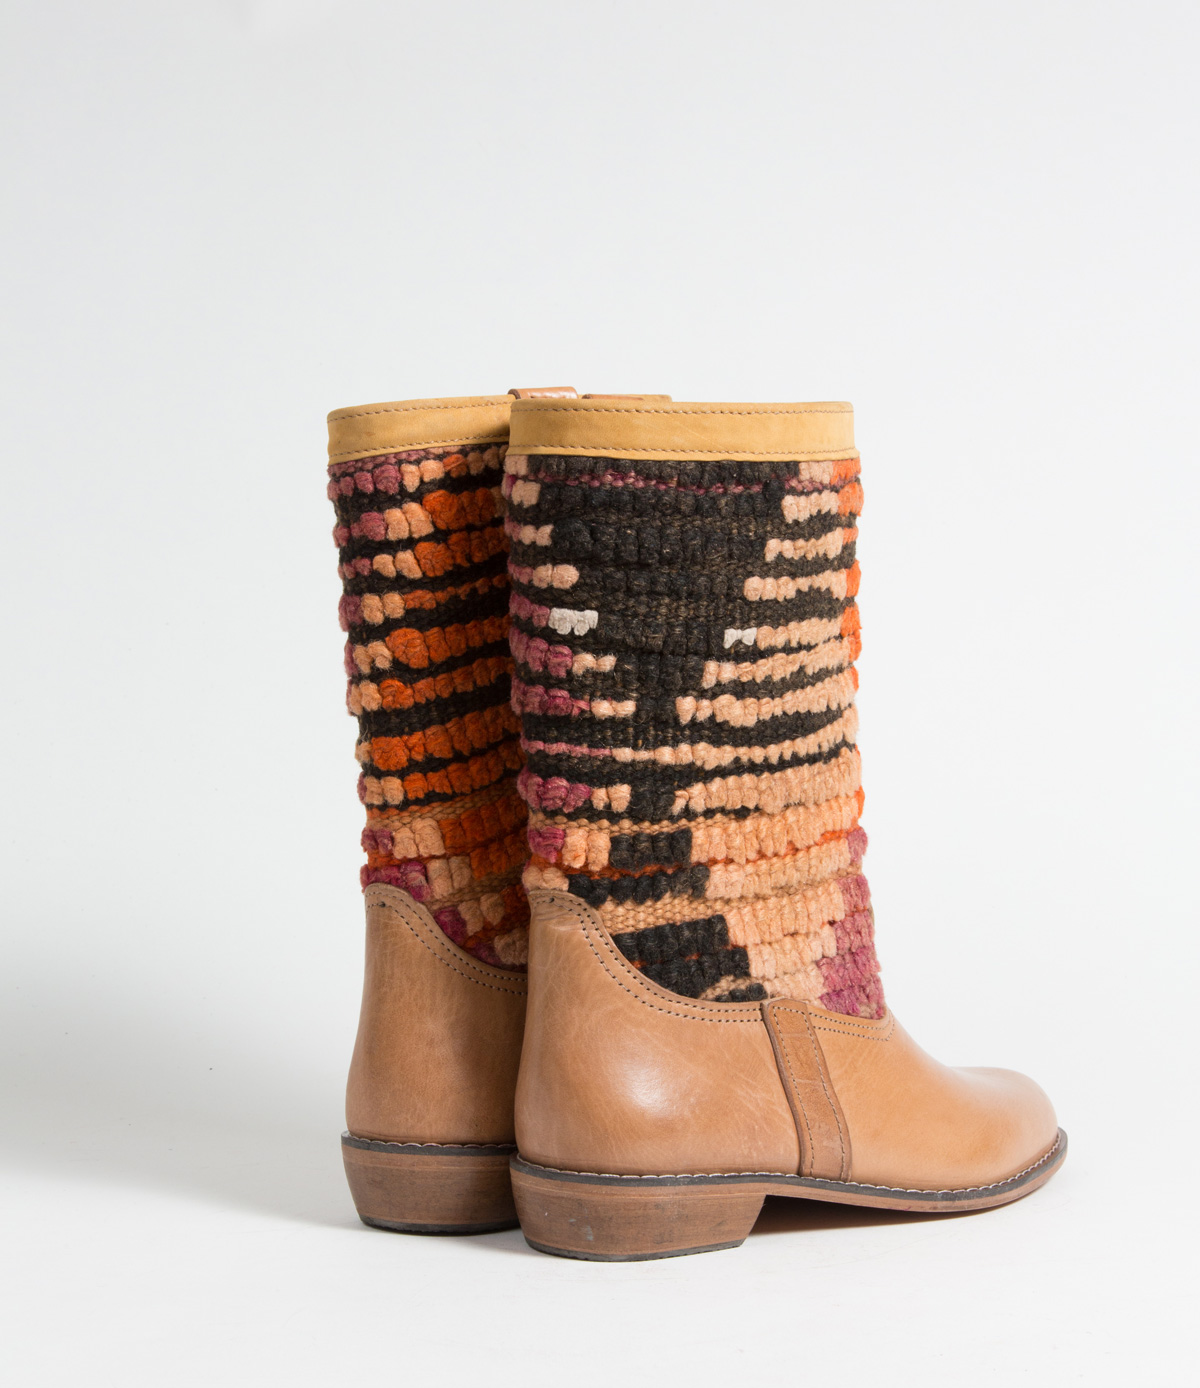 Bottes Kilim cuir mababouche artisanales (Réf. GL5-41)